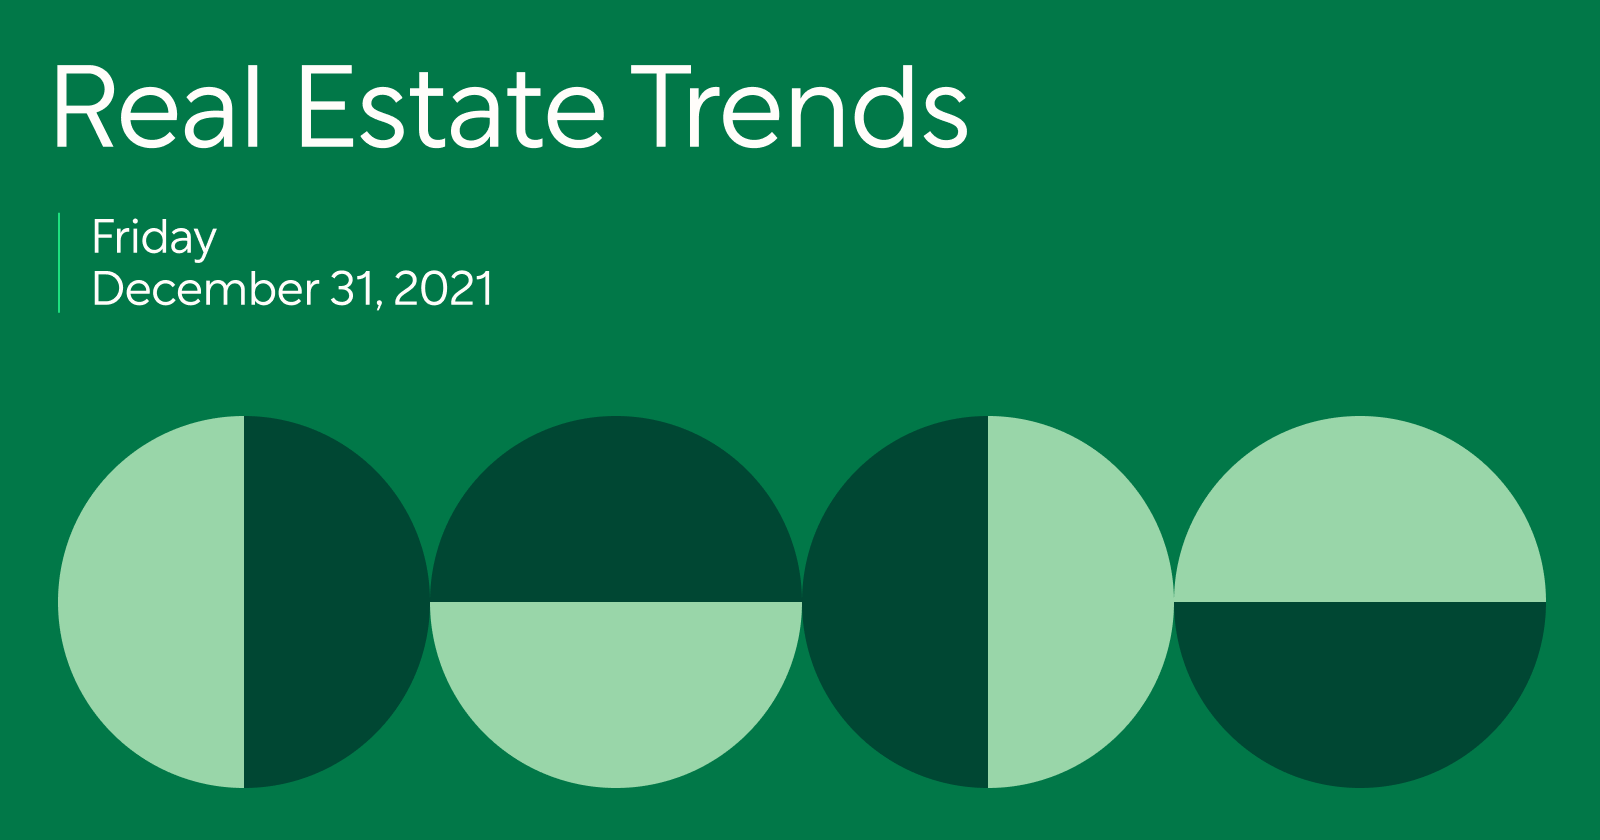 Trend Report: Rates are set to rise, so get ready to make your move